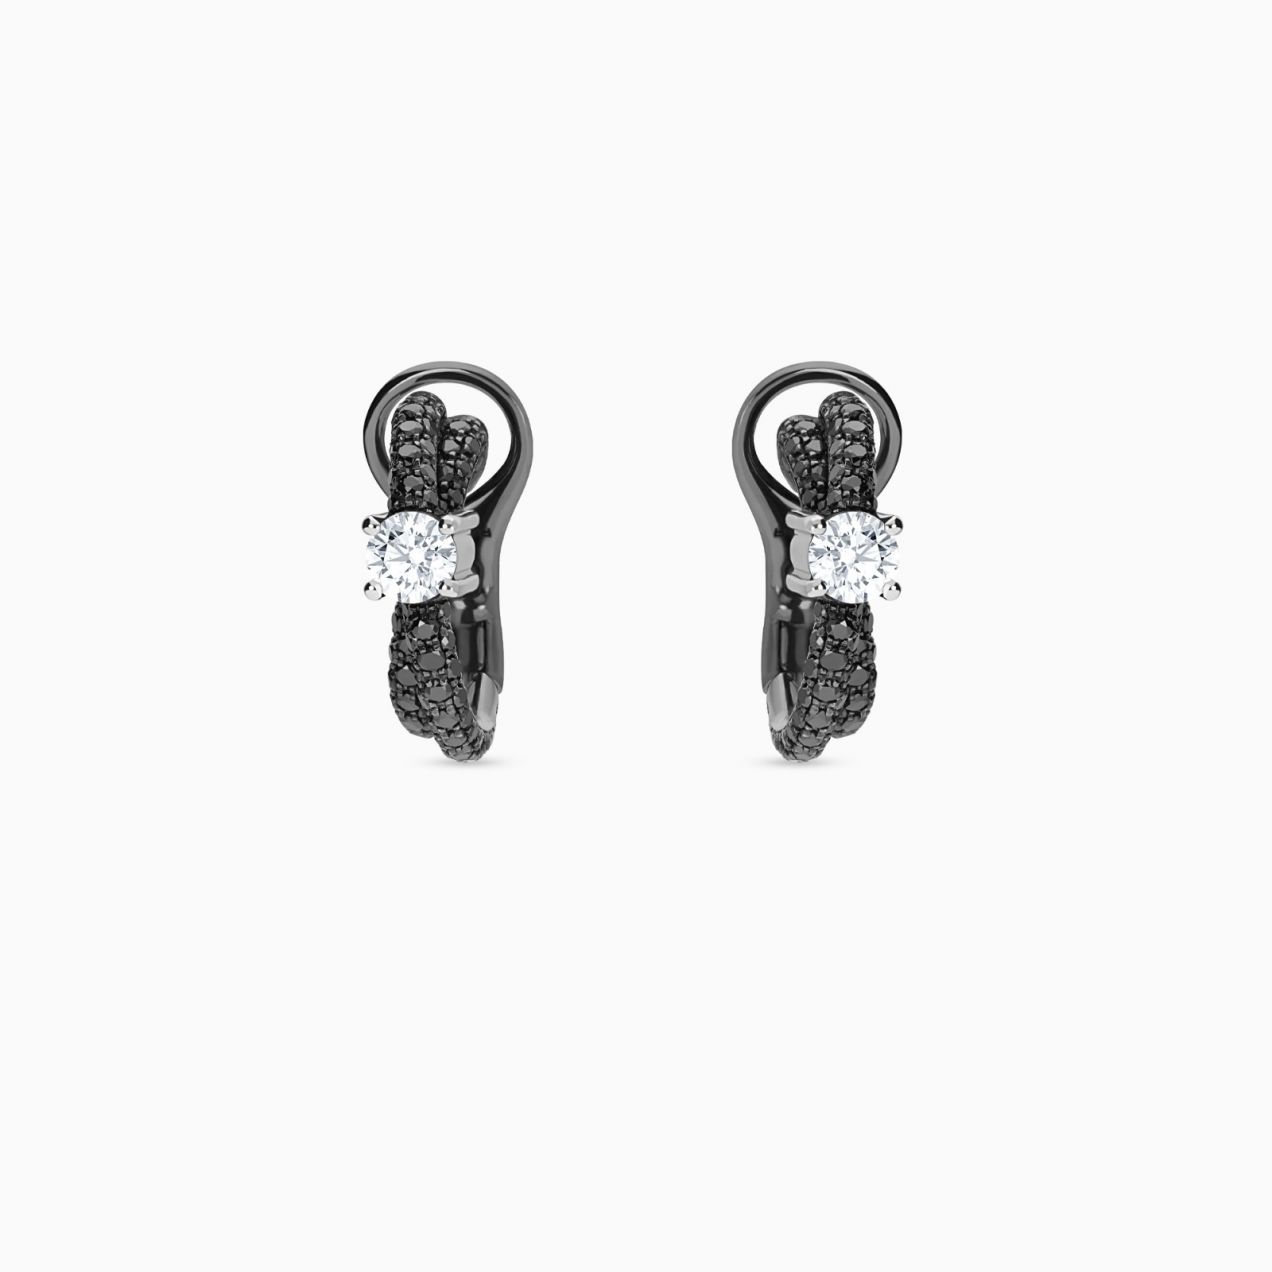 Black rhodium plated gold cross earrings with black diamonds and white centre diamond